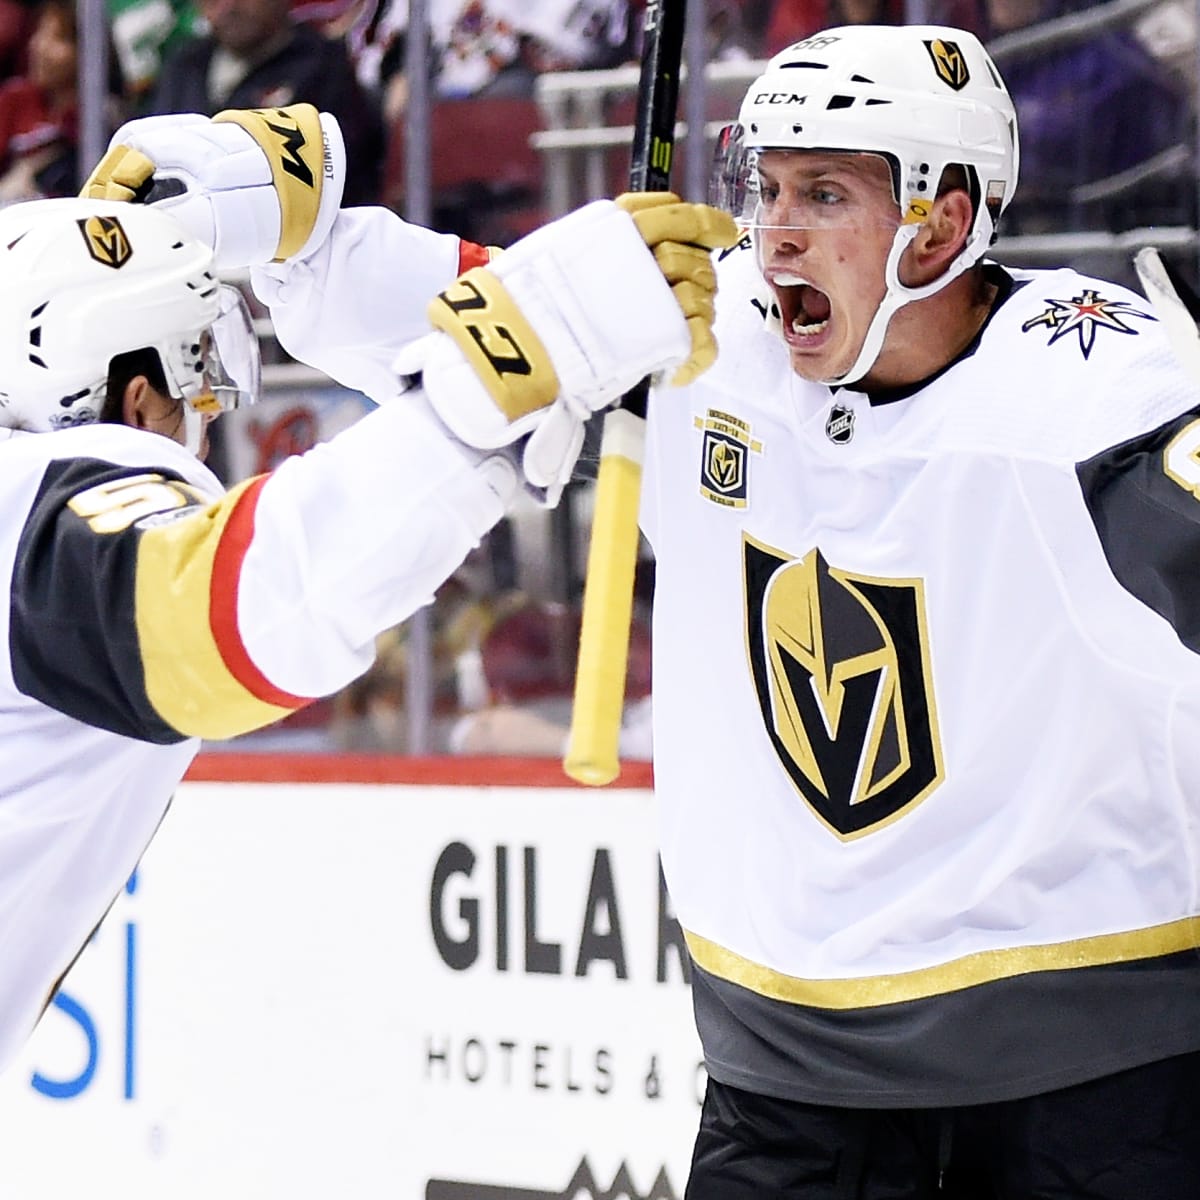 Vegas Golden Knights vs. New Jersey Devils live game thread - VGK Today on  Sports Illustrated: News, Analysis, and More